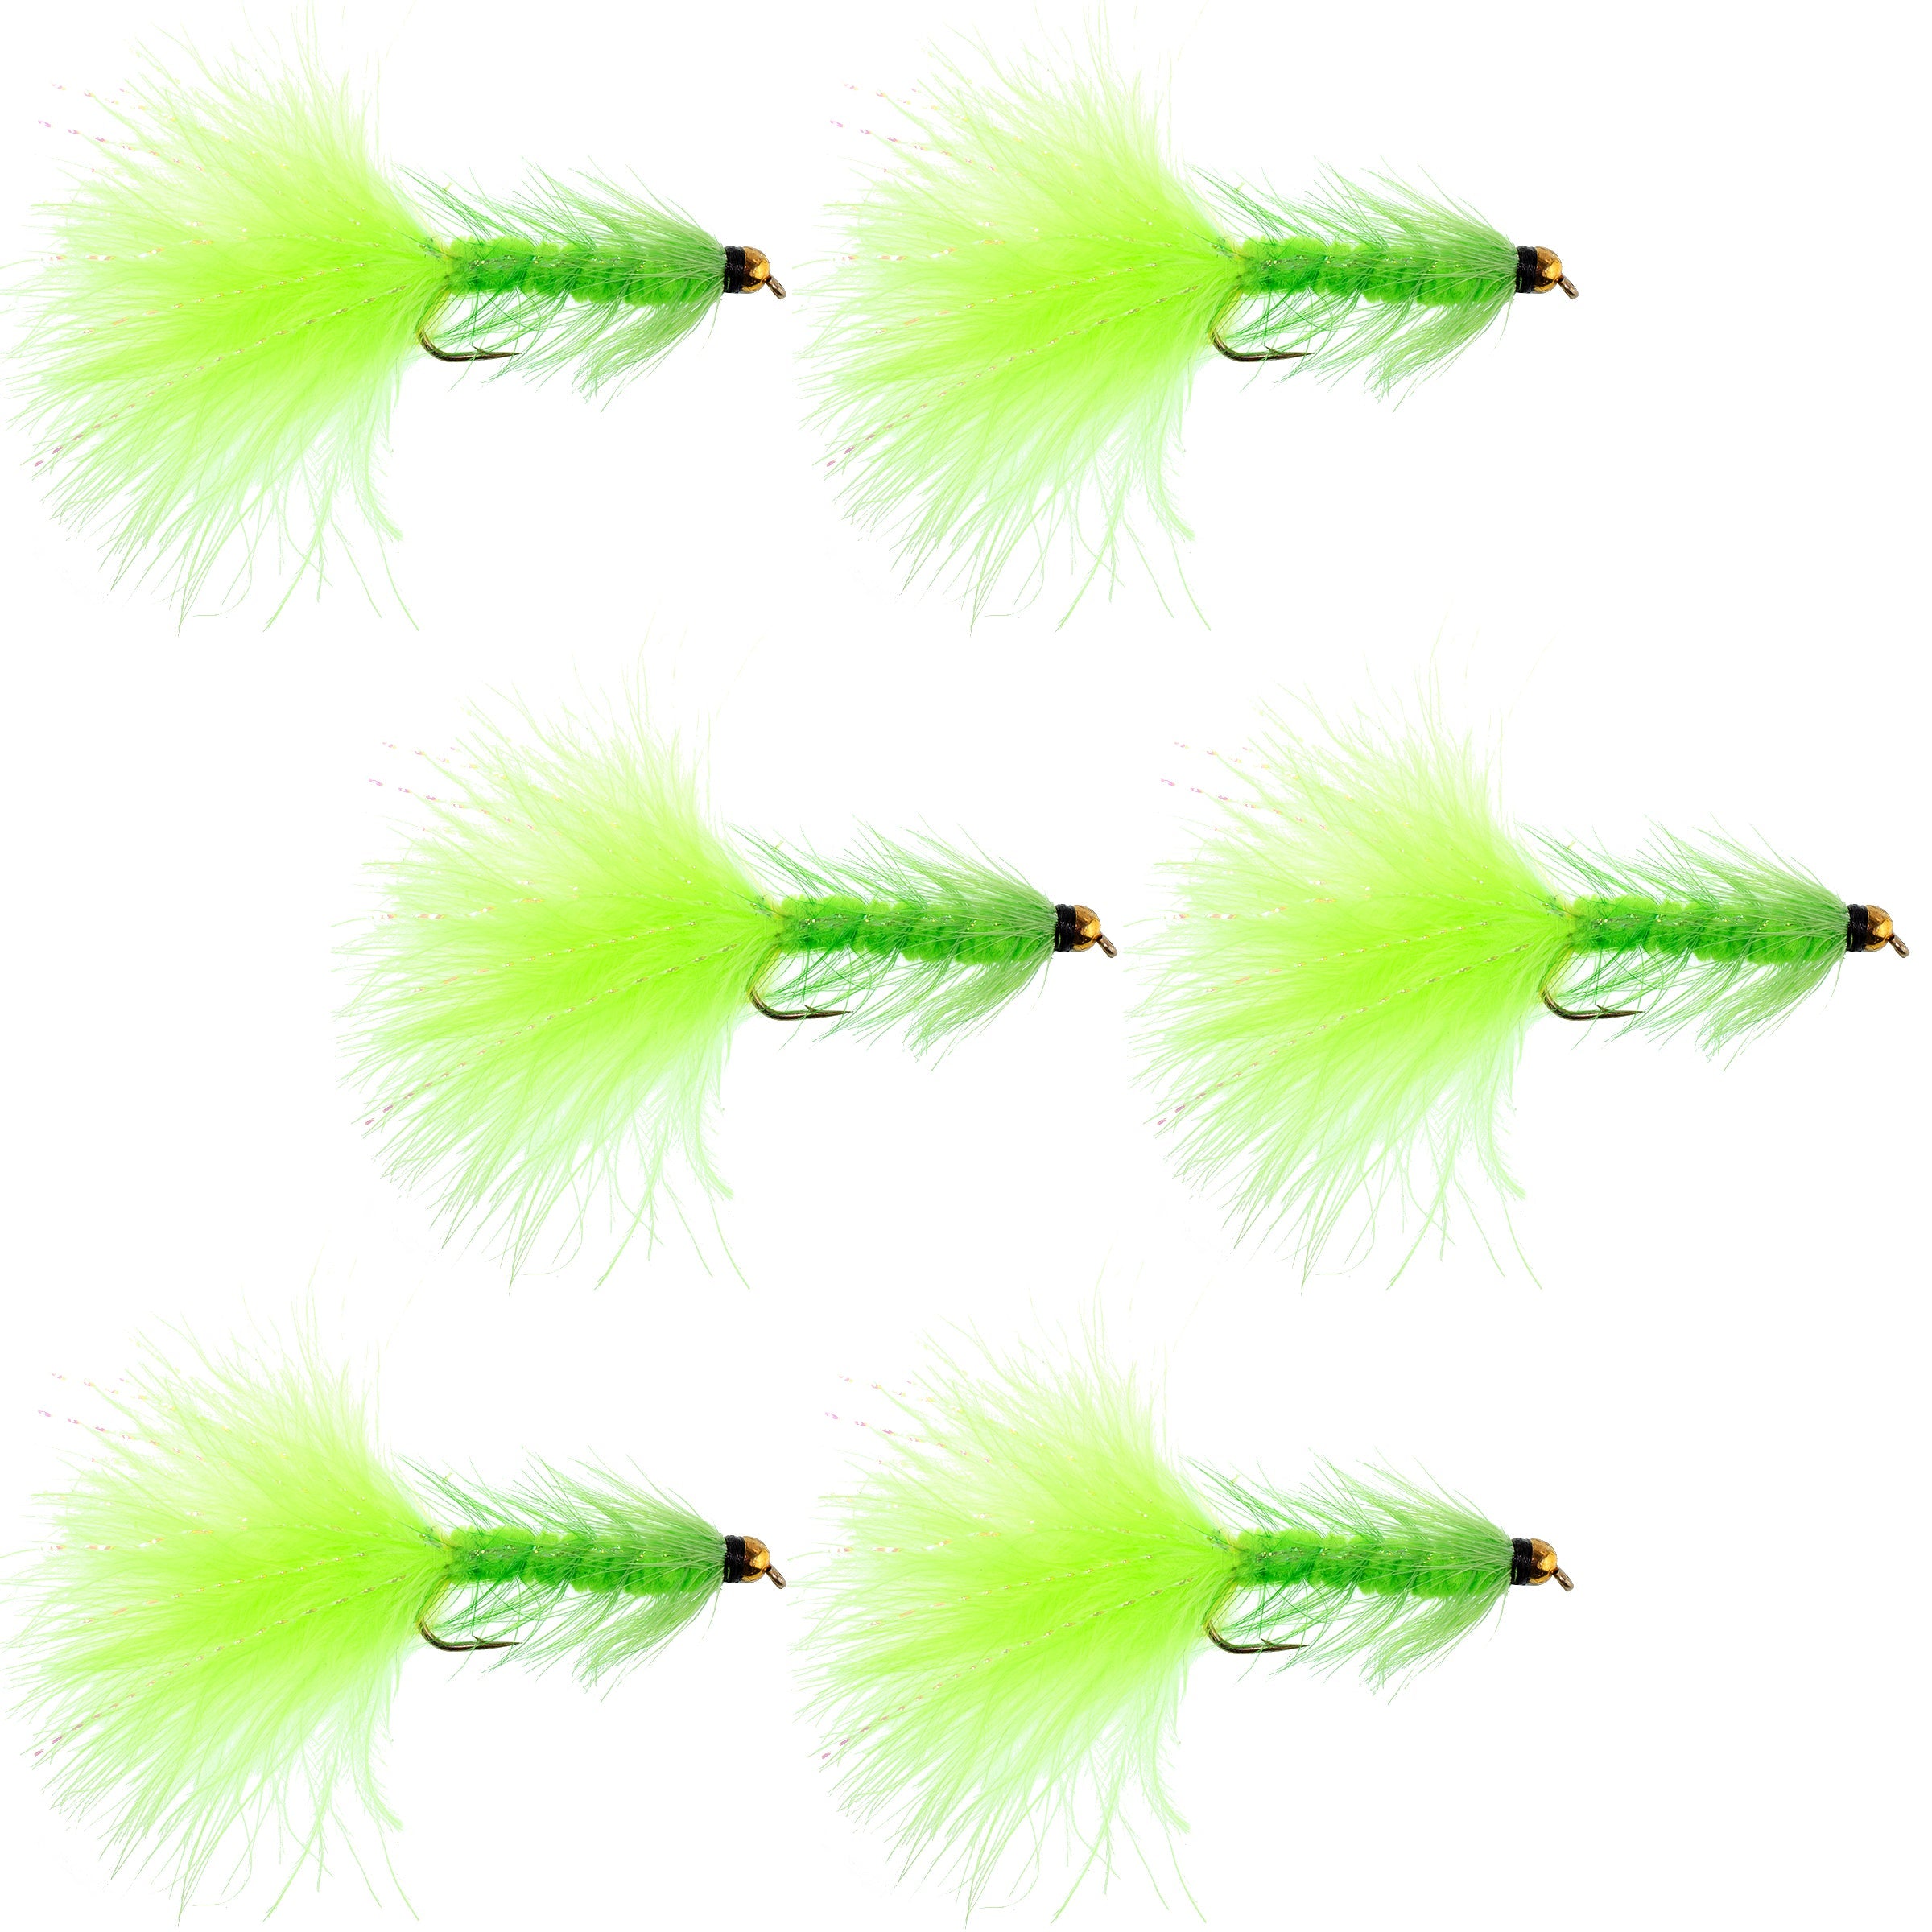 Chartreuse Bead Head Crystal Woolly Bugger Classic Streamer Flies - Set of 6 Trout Fly Fishing Flies - Hook Size 4